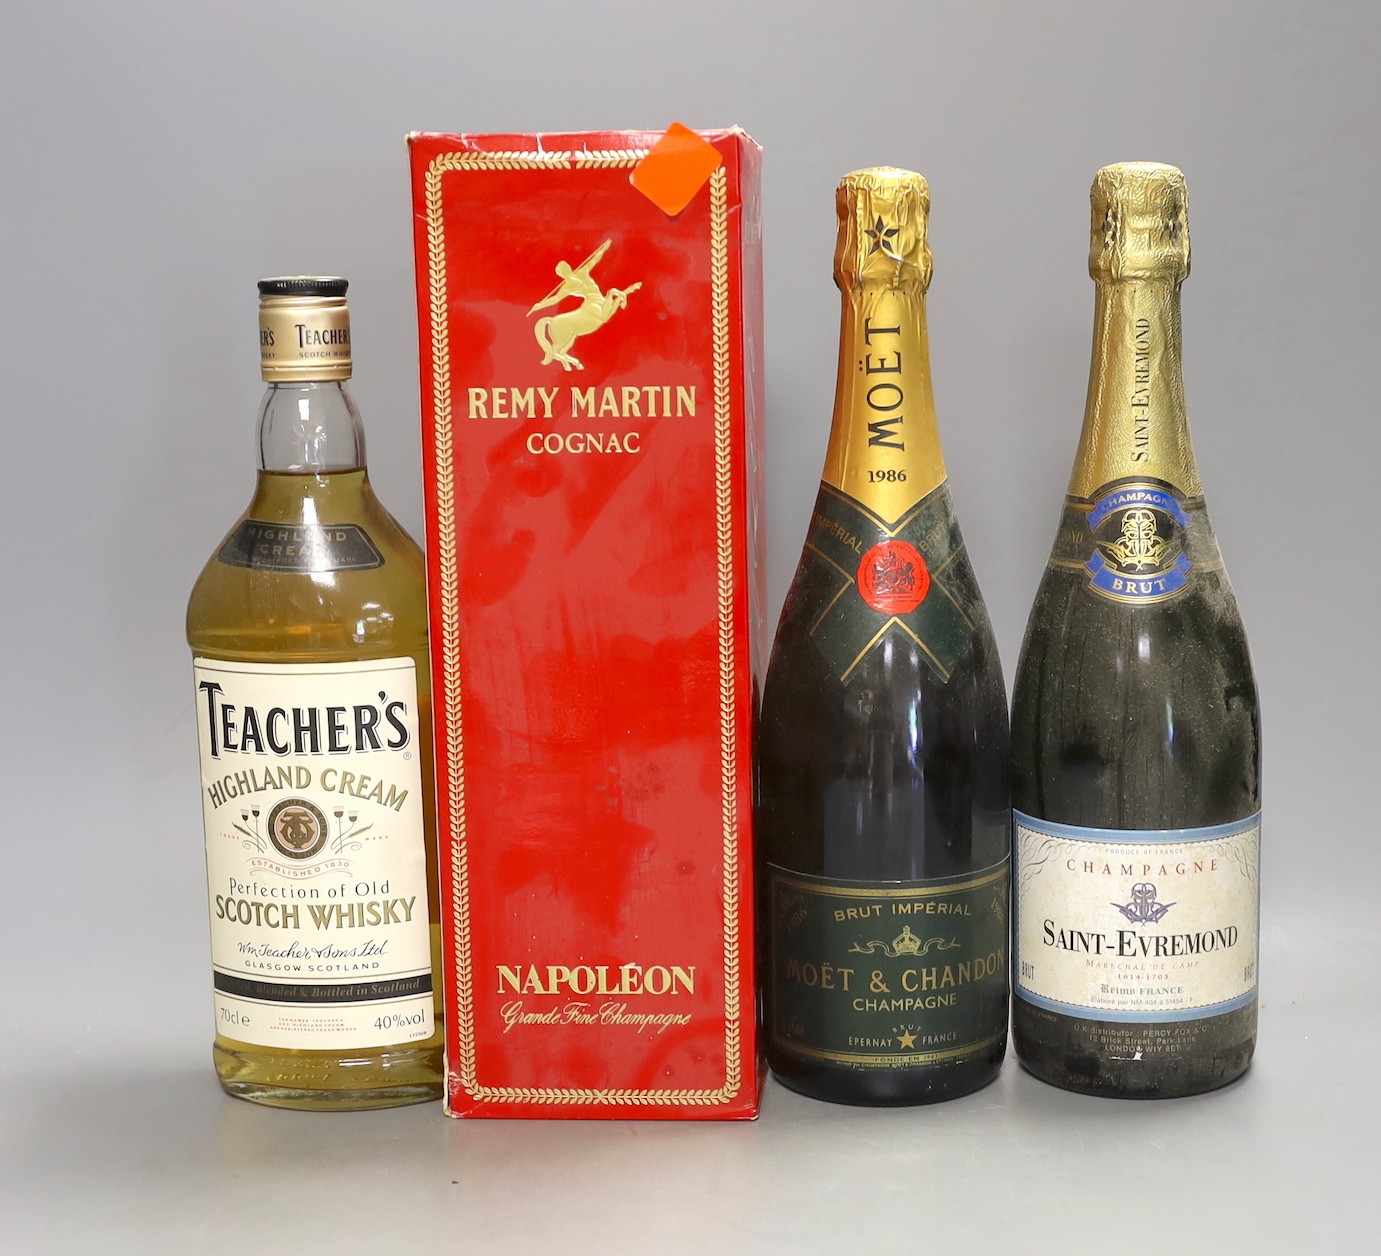 One bottle of 1986 Moët and Chandon Brut champagne, together with a bottle of Saint-Evremond champagne, a 70cl bottle of Teacher’s Highland Cream scotch whisky, and a boxed bottle of Remy Martin Cognac (4)